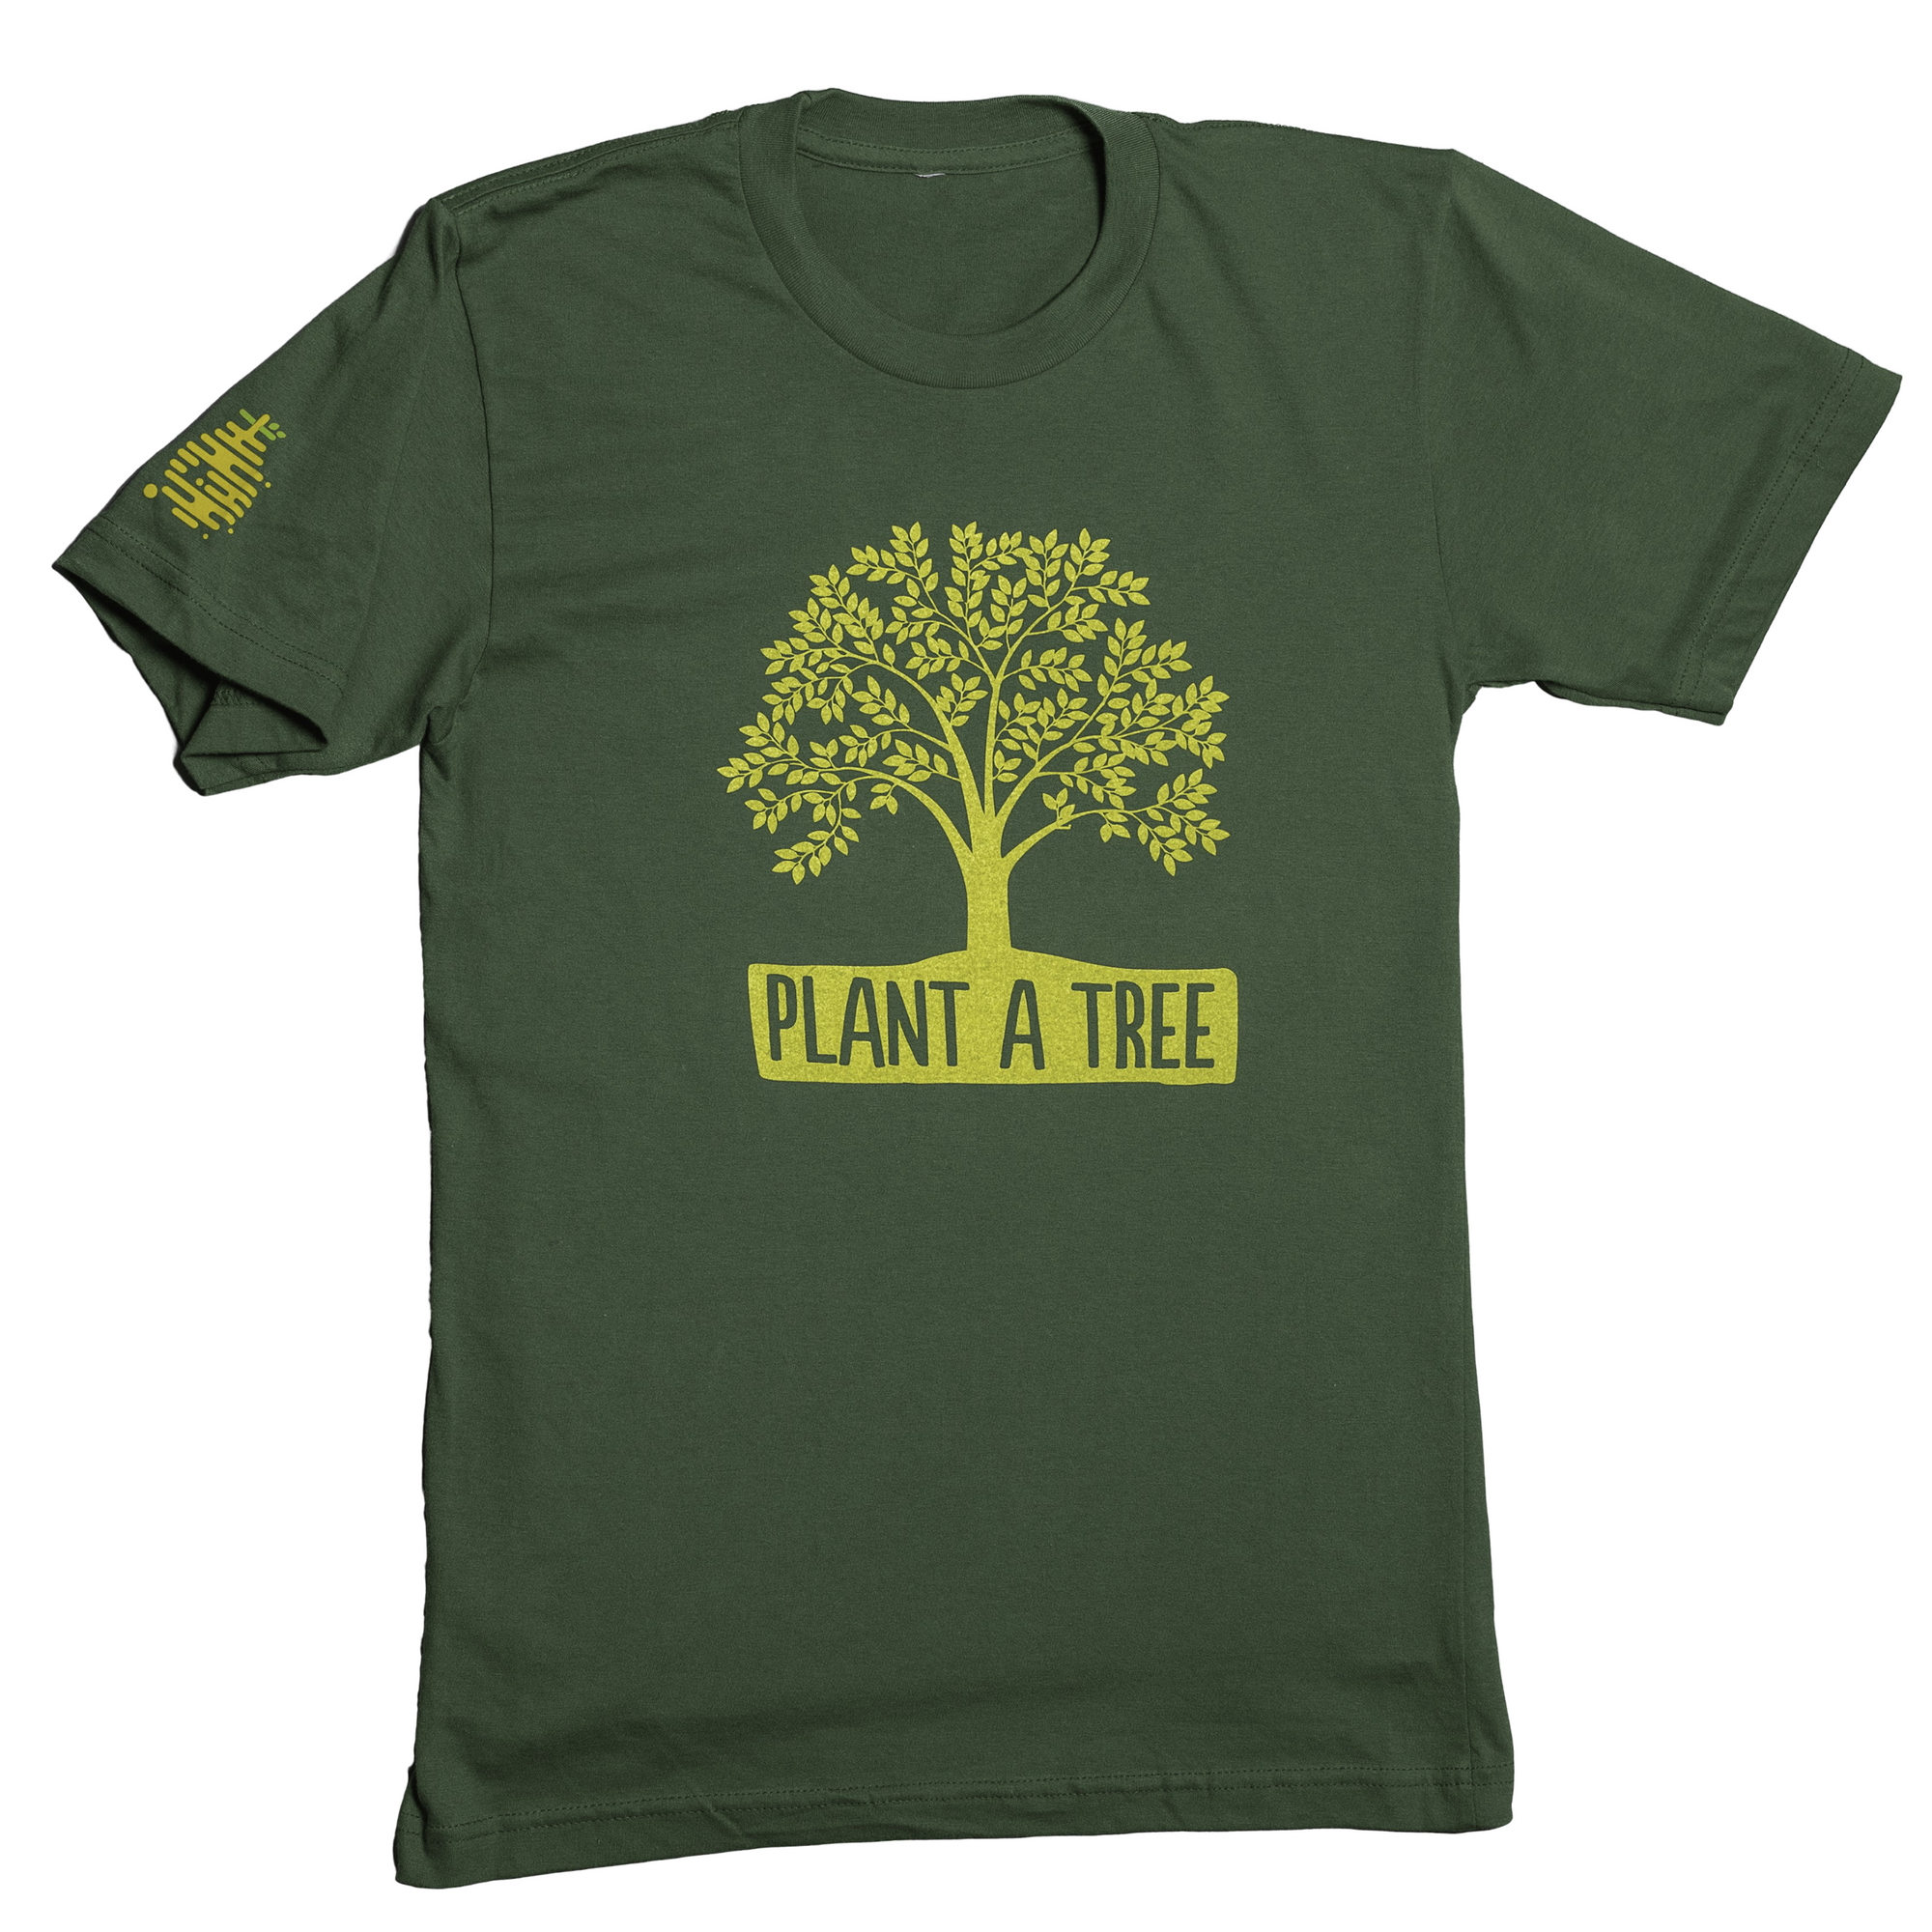 Plant a Tree - GreenHive Collective - ECO-FRIENDLY APPAREL